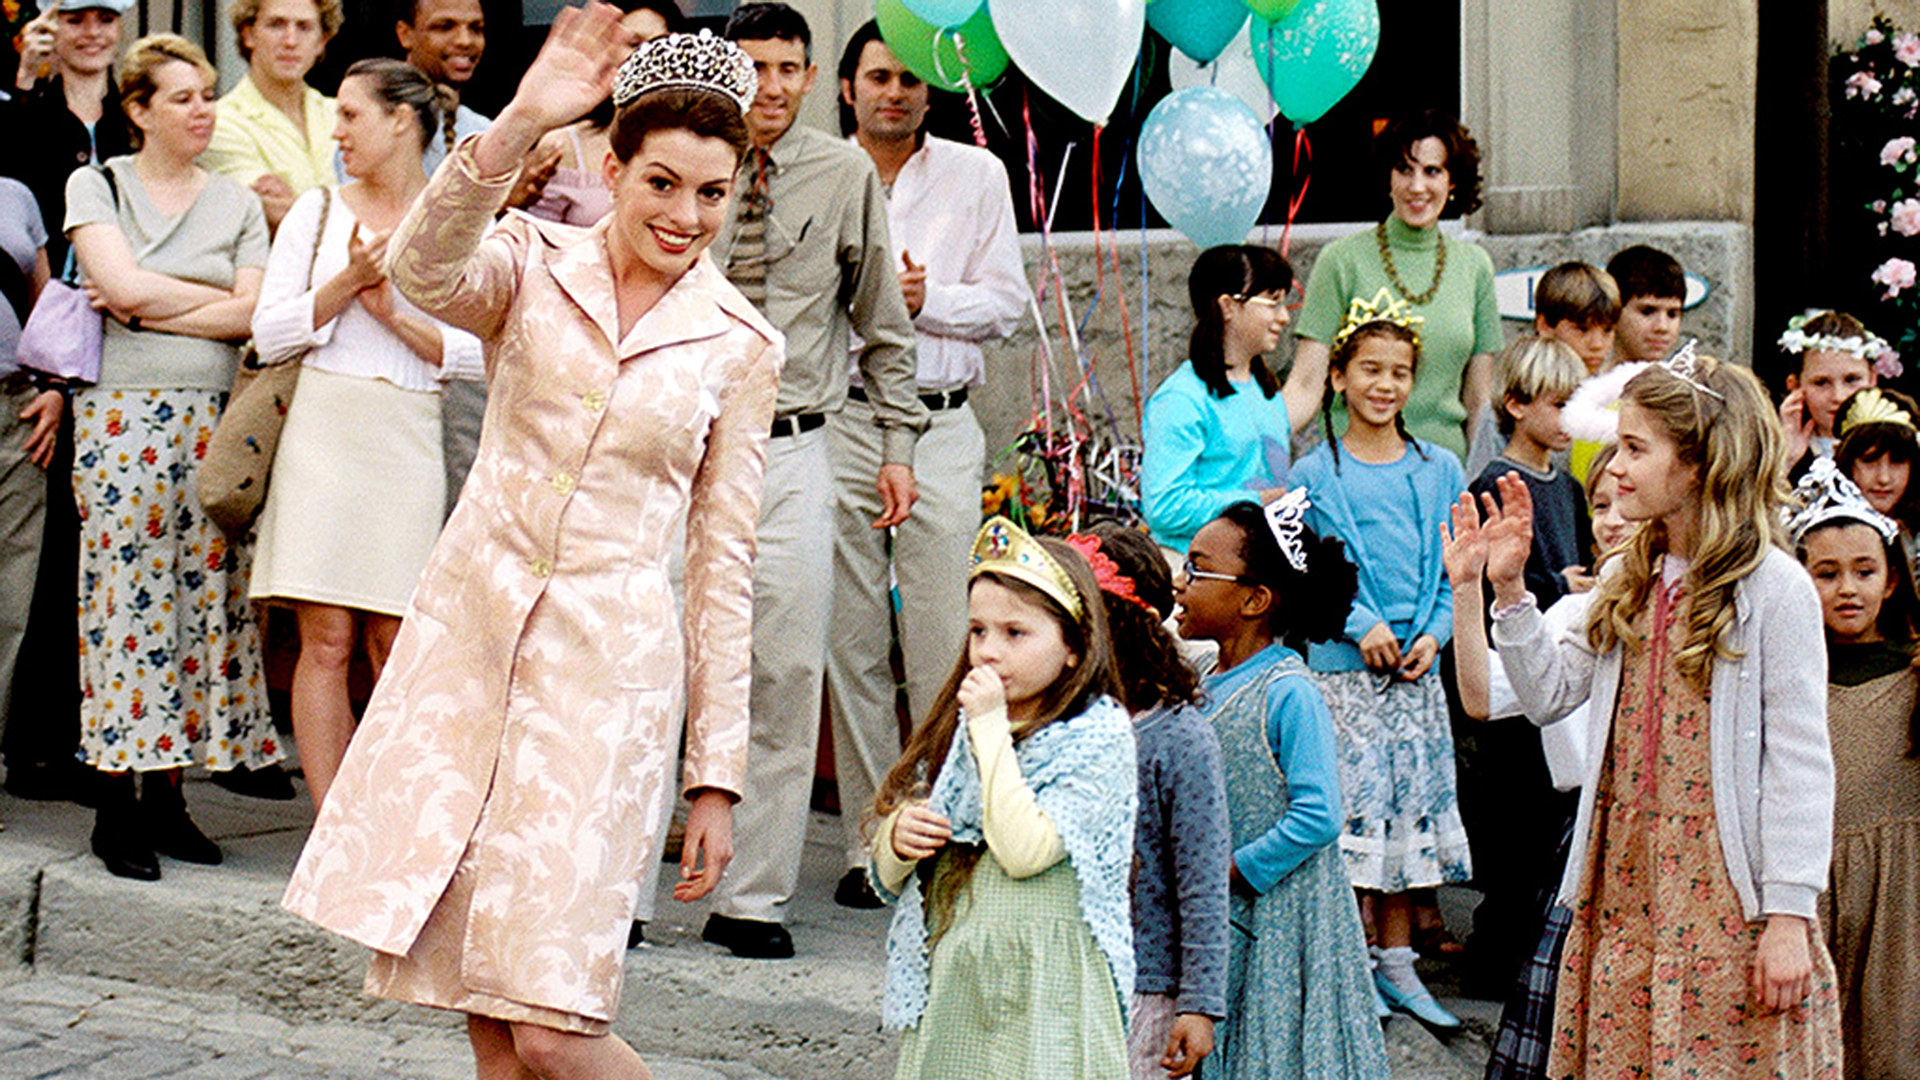 Anne Hathaway walks in a parade with Abigail Bresline